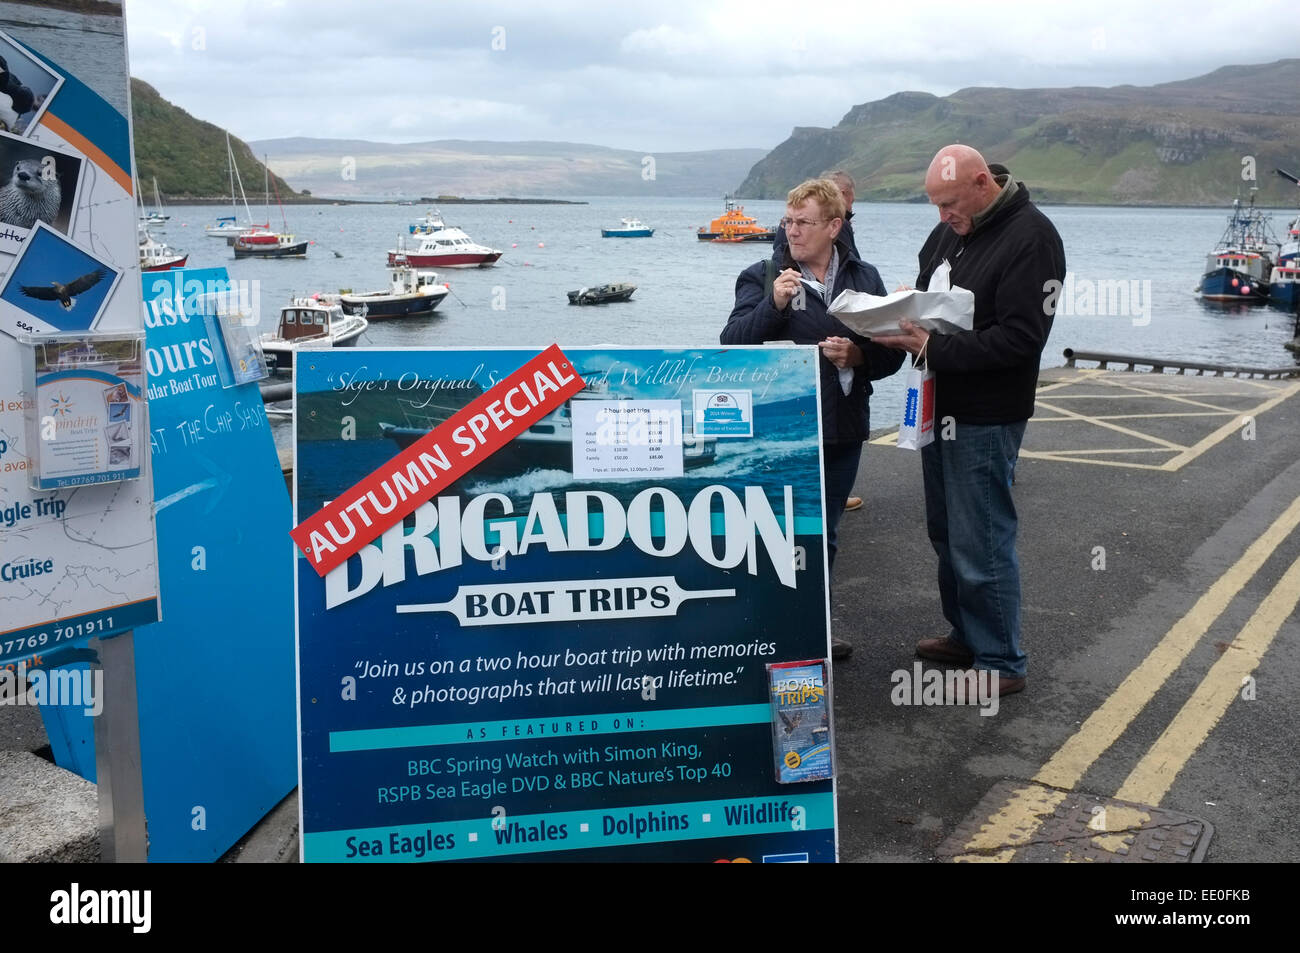 Portree Harbour, Isle of Skye, Scotland. A couple eat fish and chips whilst waiting for a Brigadoon boat trip Stock Photo